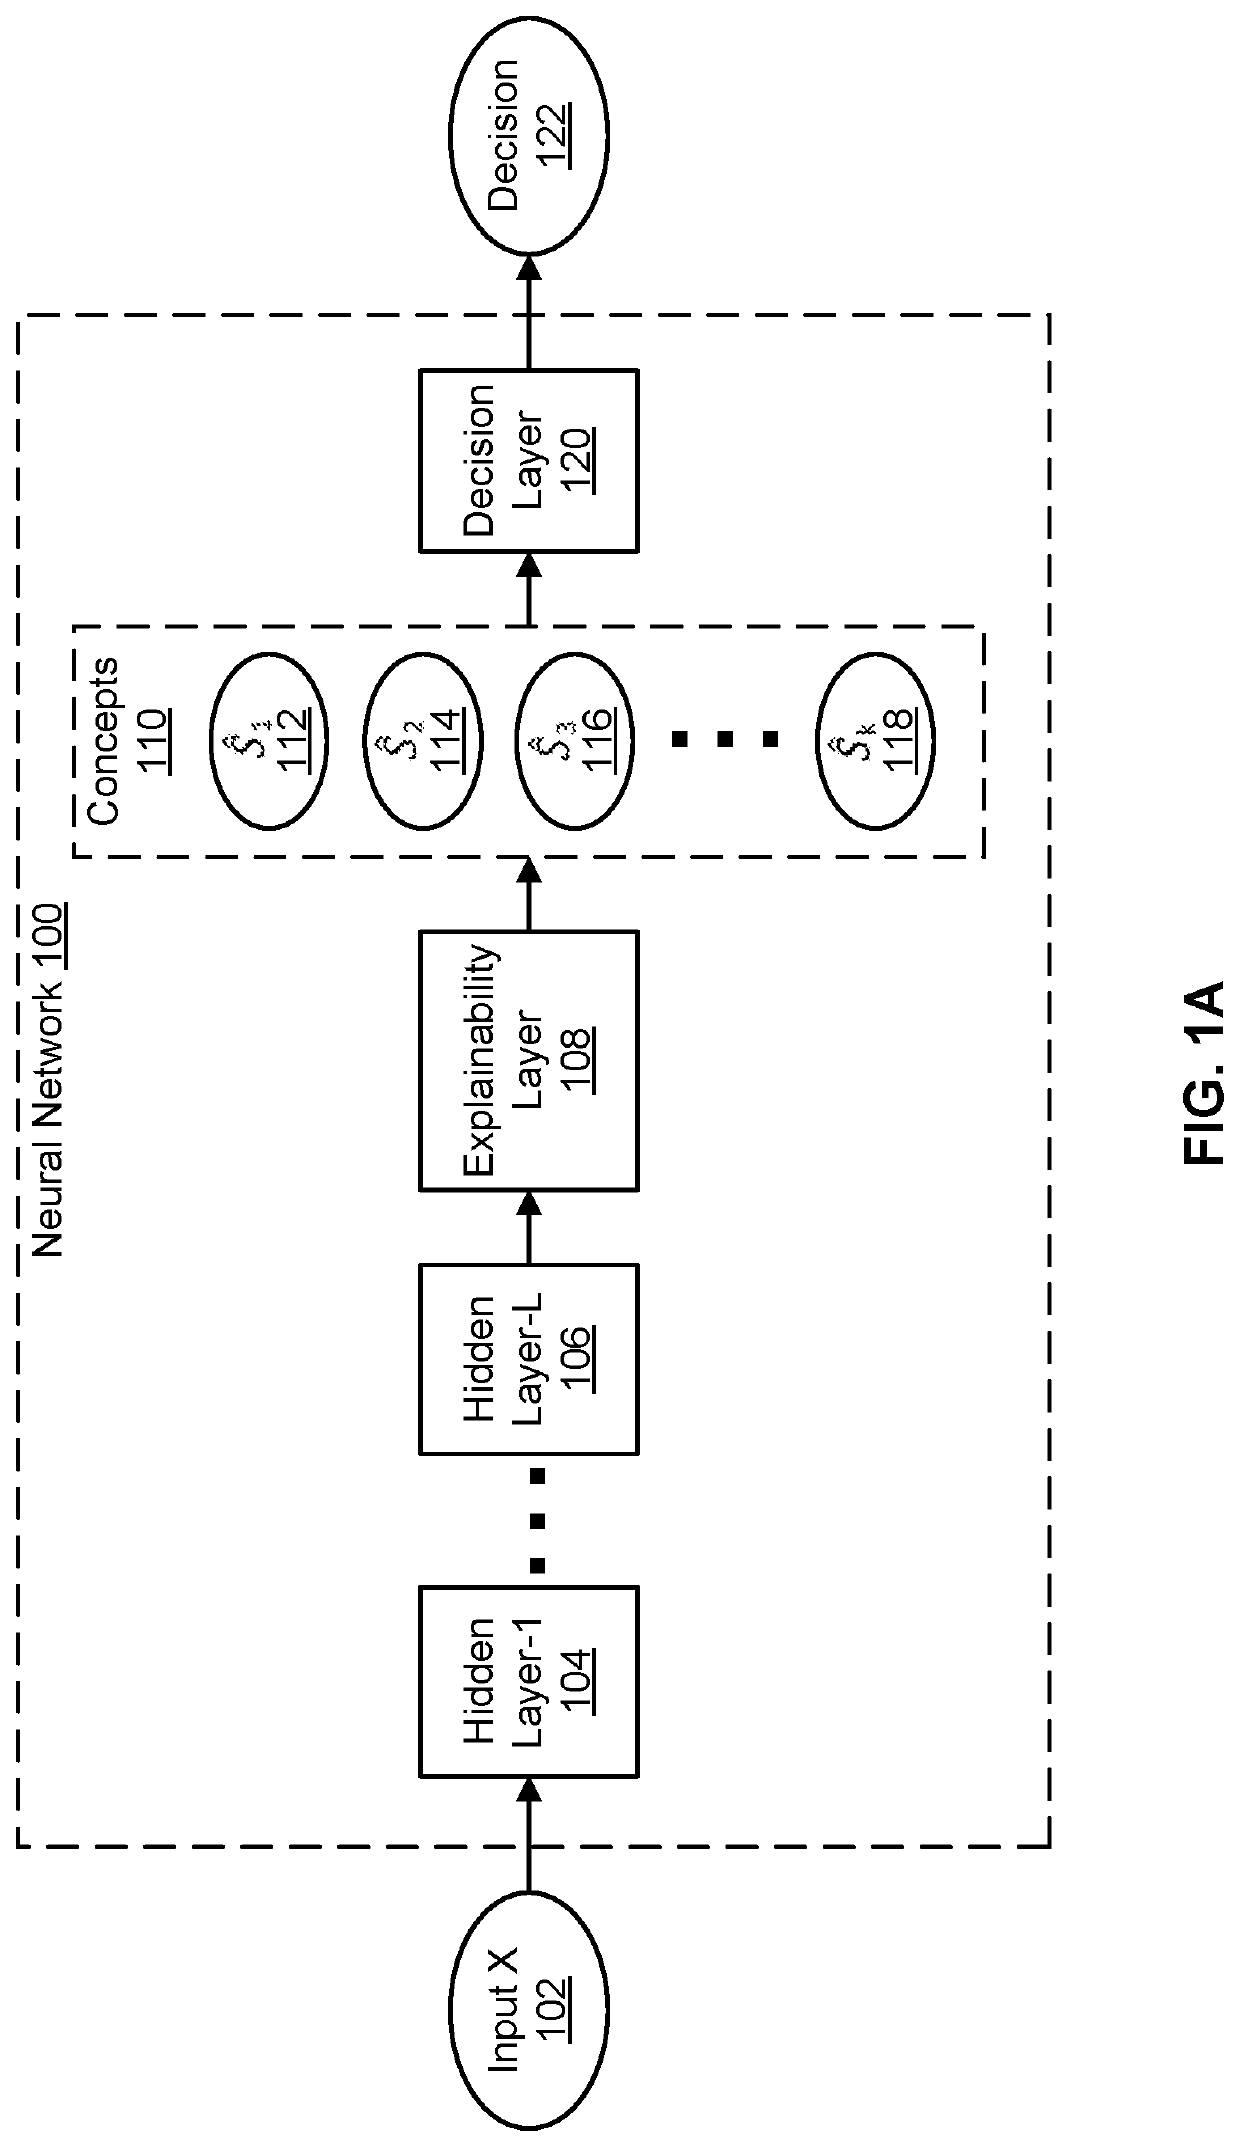 Hierarchical machine learning model for performing a decision task and an explanation task